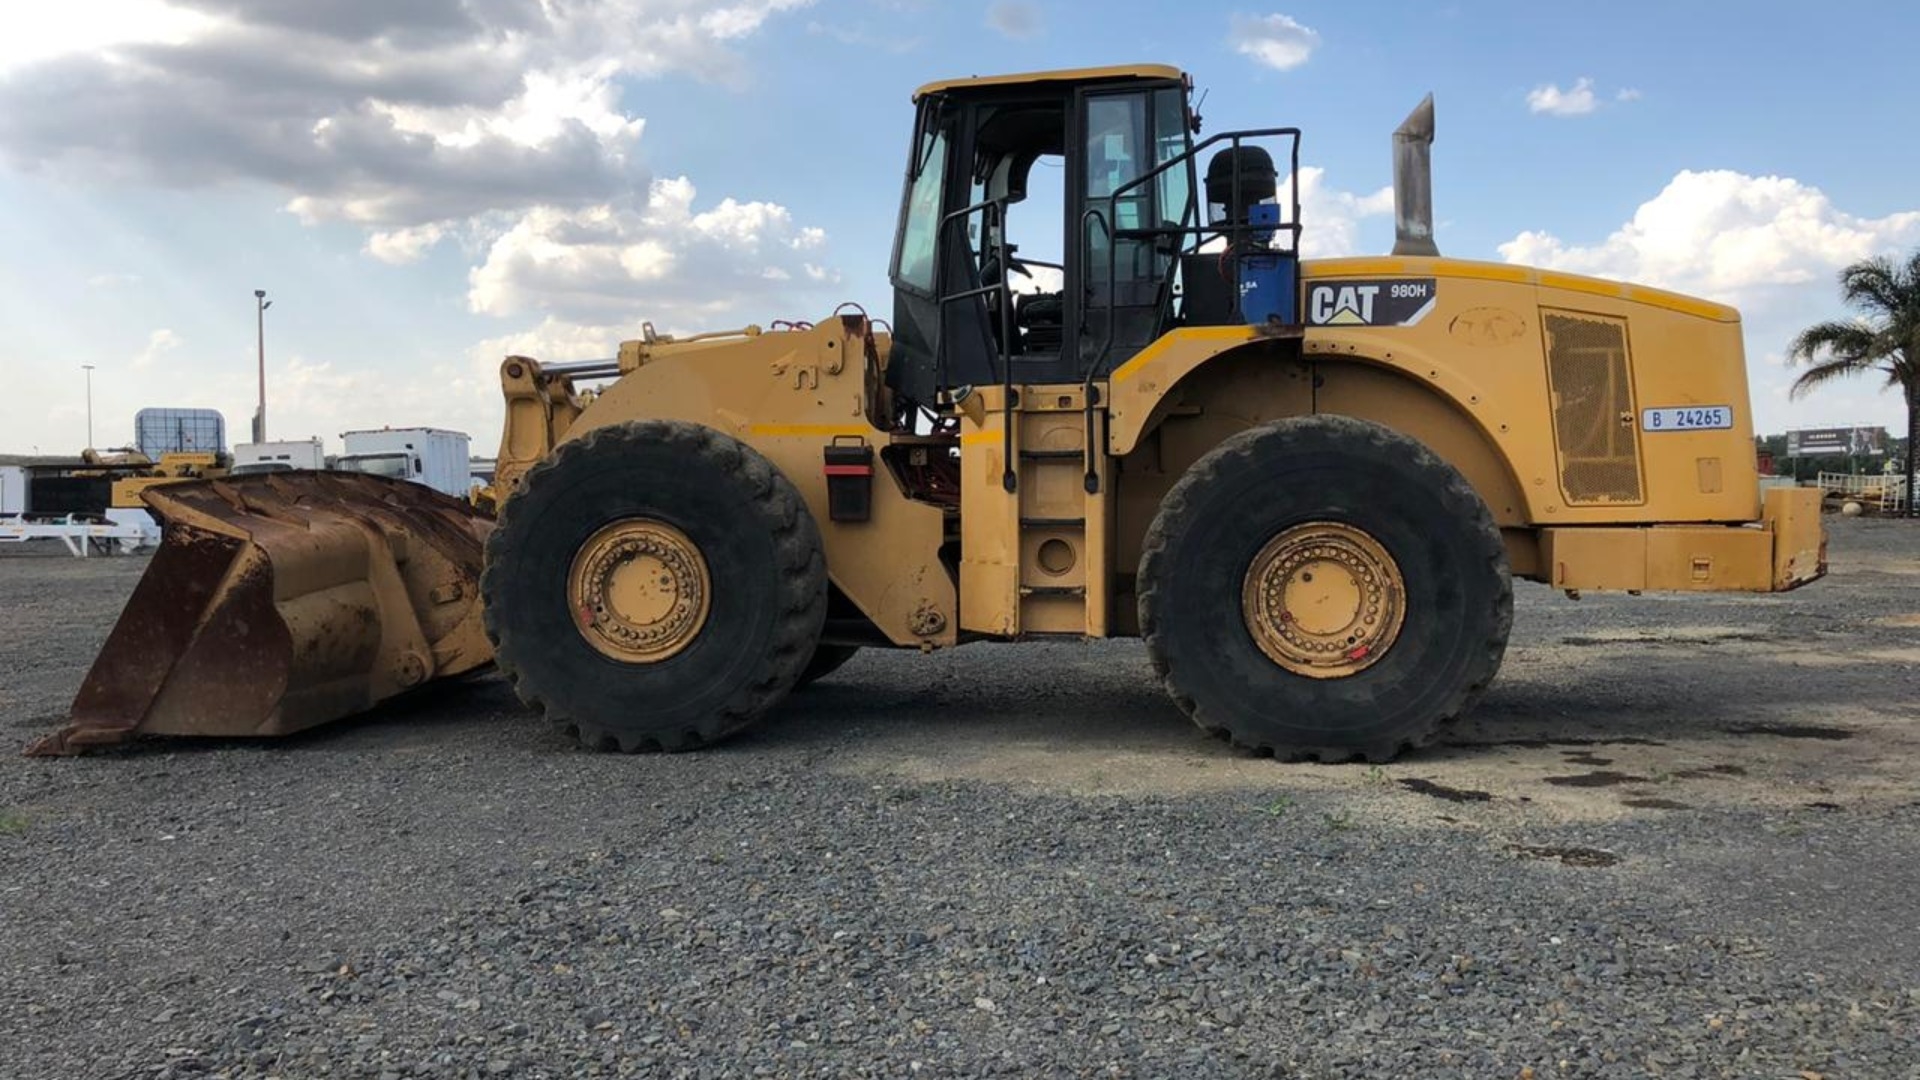 2012 Caterpillar 980H FRONT END LOADER Construction Loaders Machinery